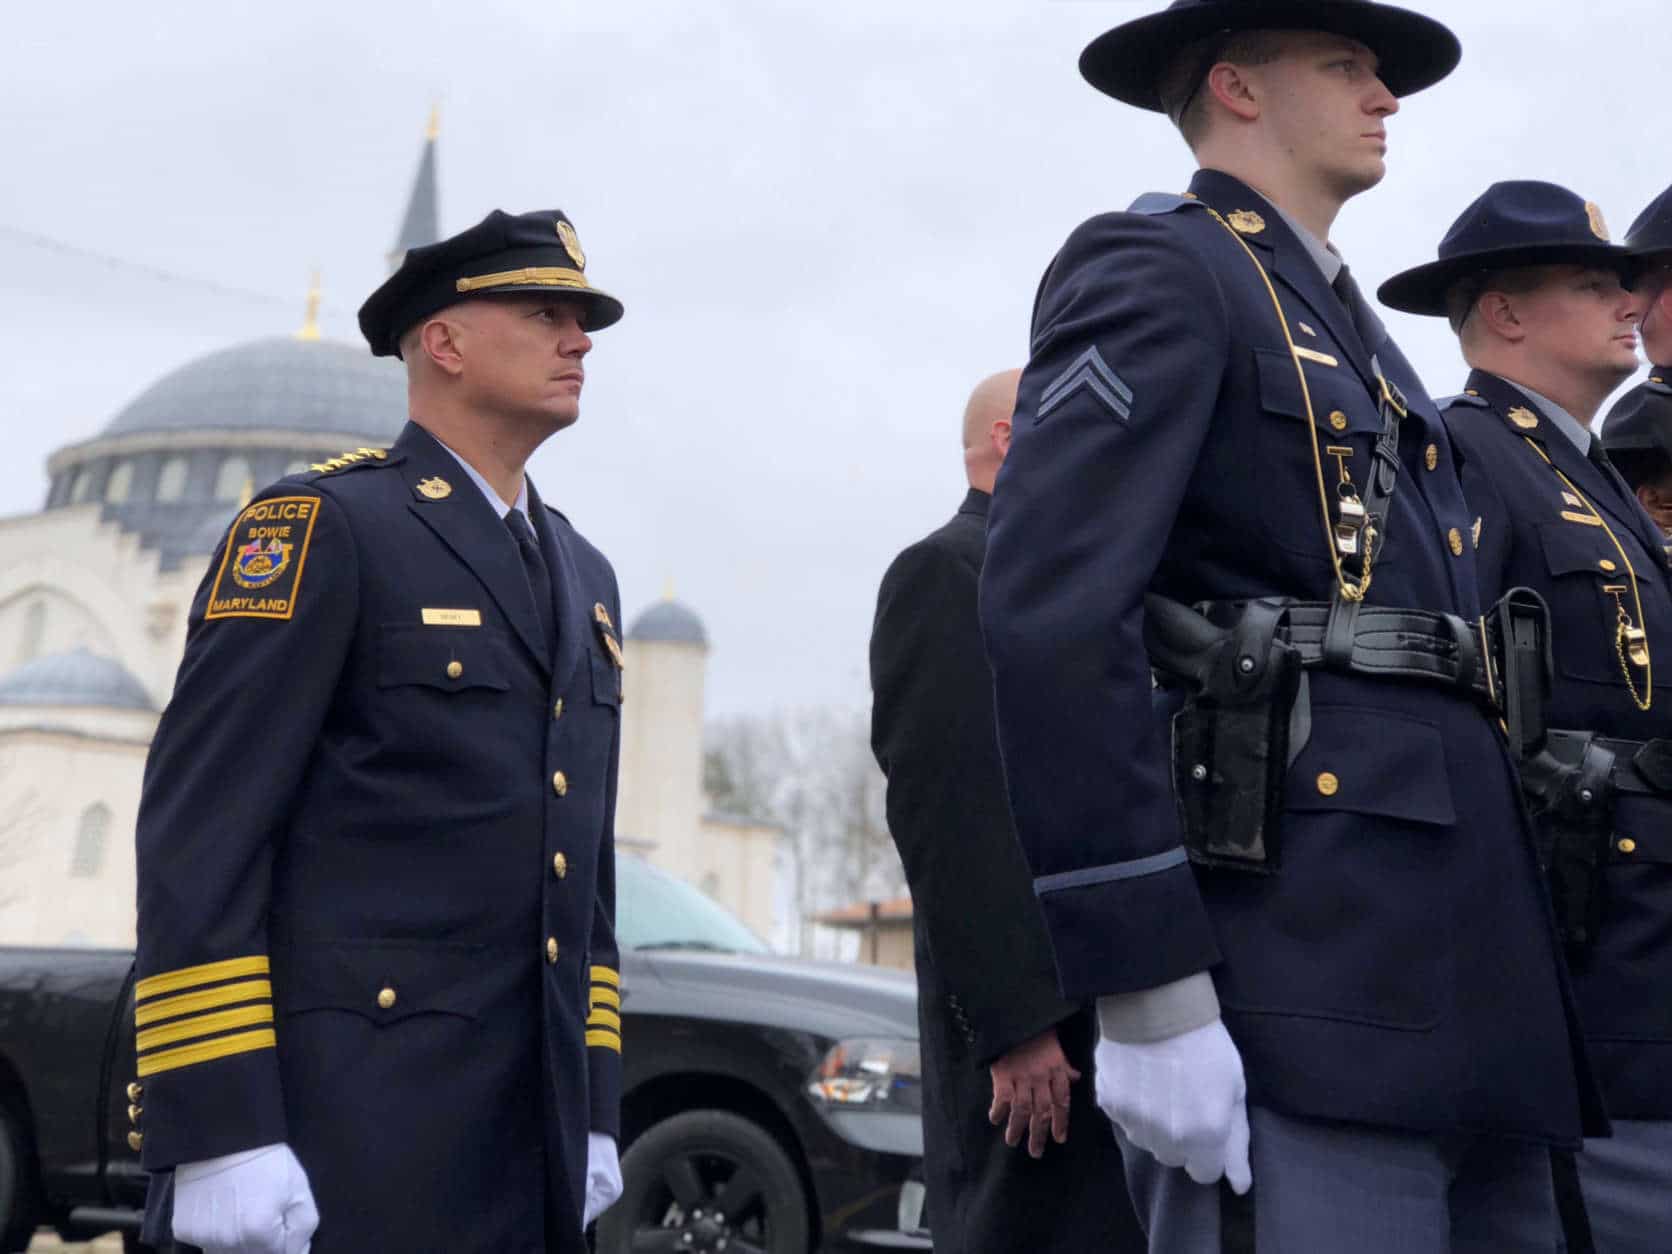 Prince George's County officers pay respects to fallen Cpl. Mujahid Ramzziddin. (WTOP/Kate Ryan)